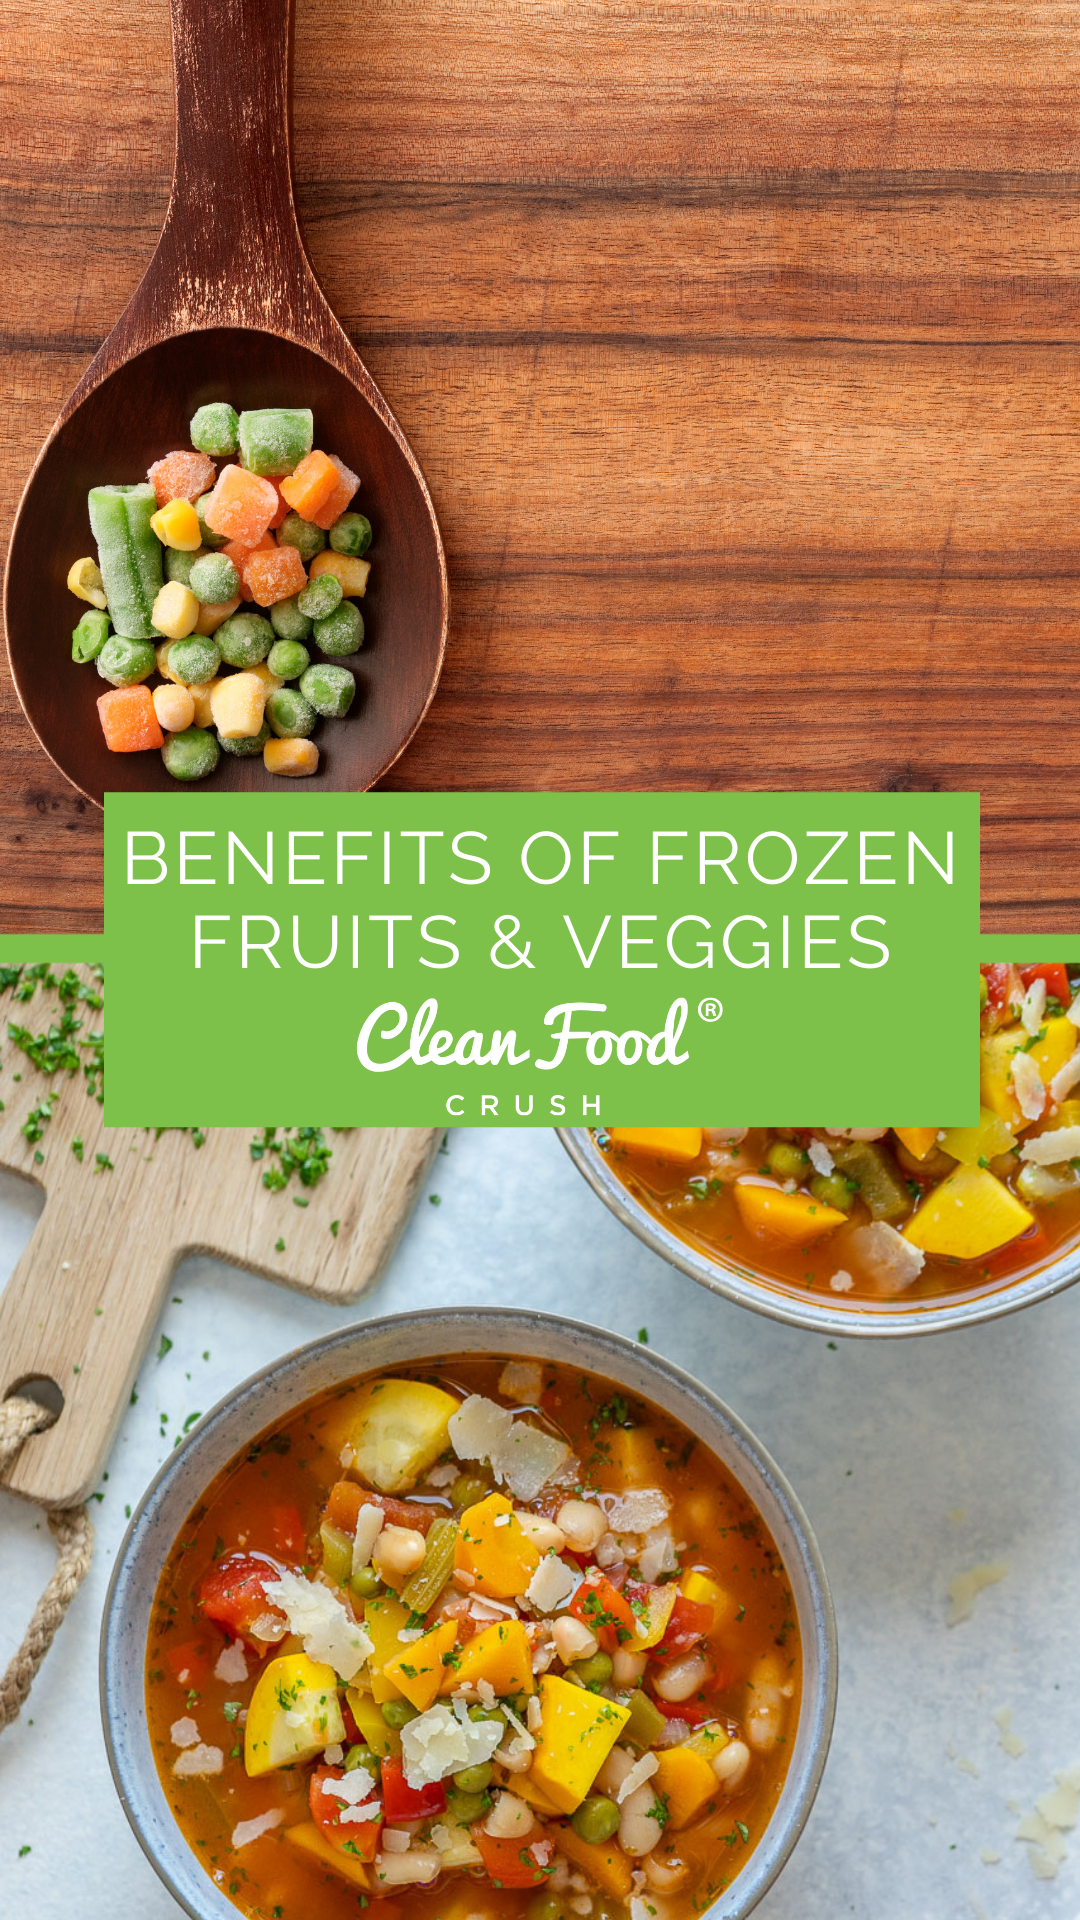 https://cleanfoodcrush.com/wp-content/uploads/2021/03/Benefits-of-Fruits-and-Veggies-for-clean-eating-cleanfoodcrush-1.png